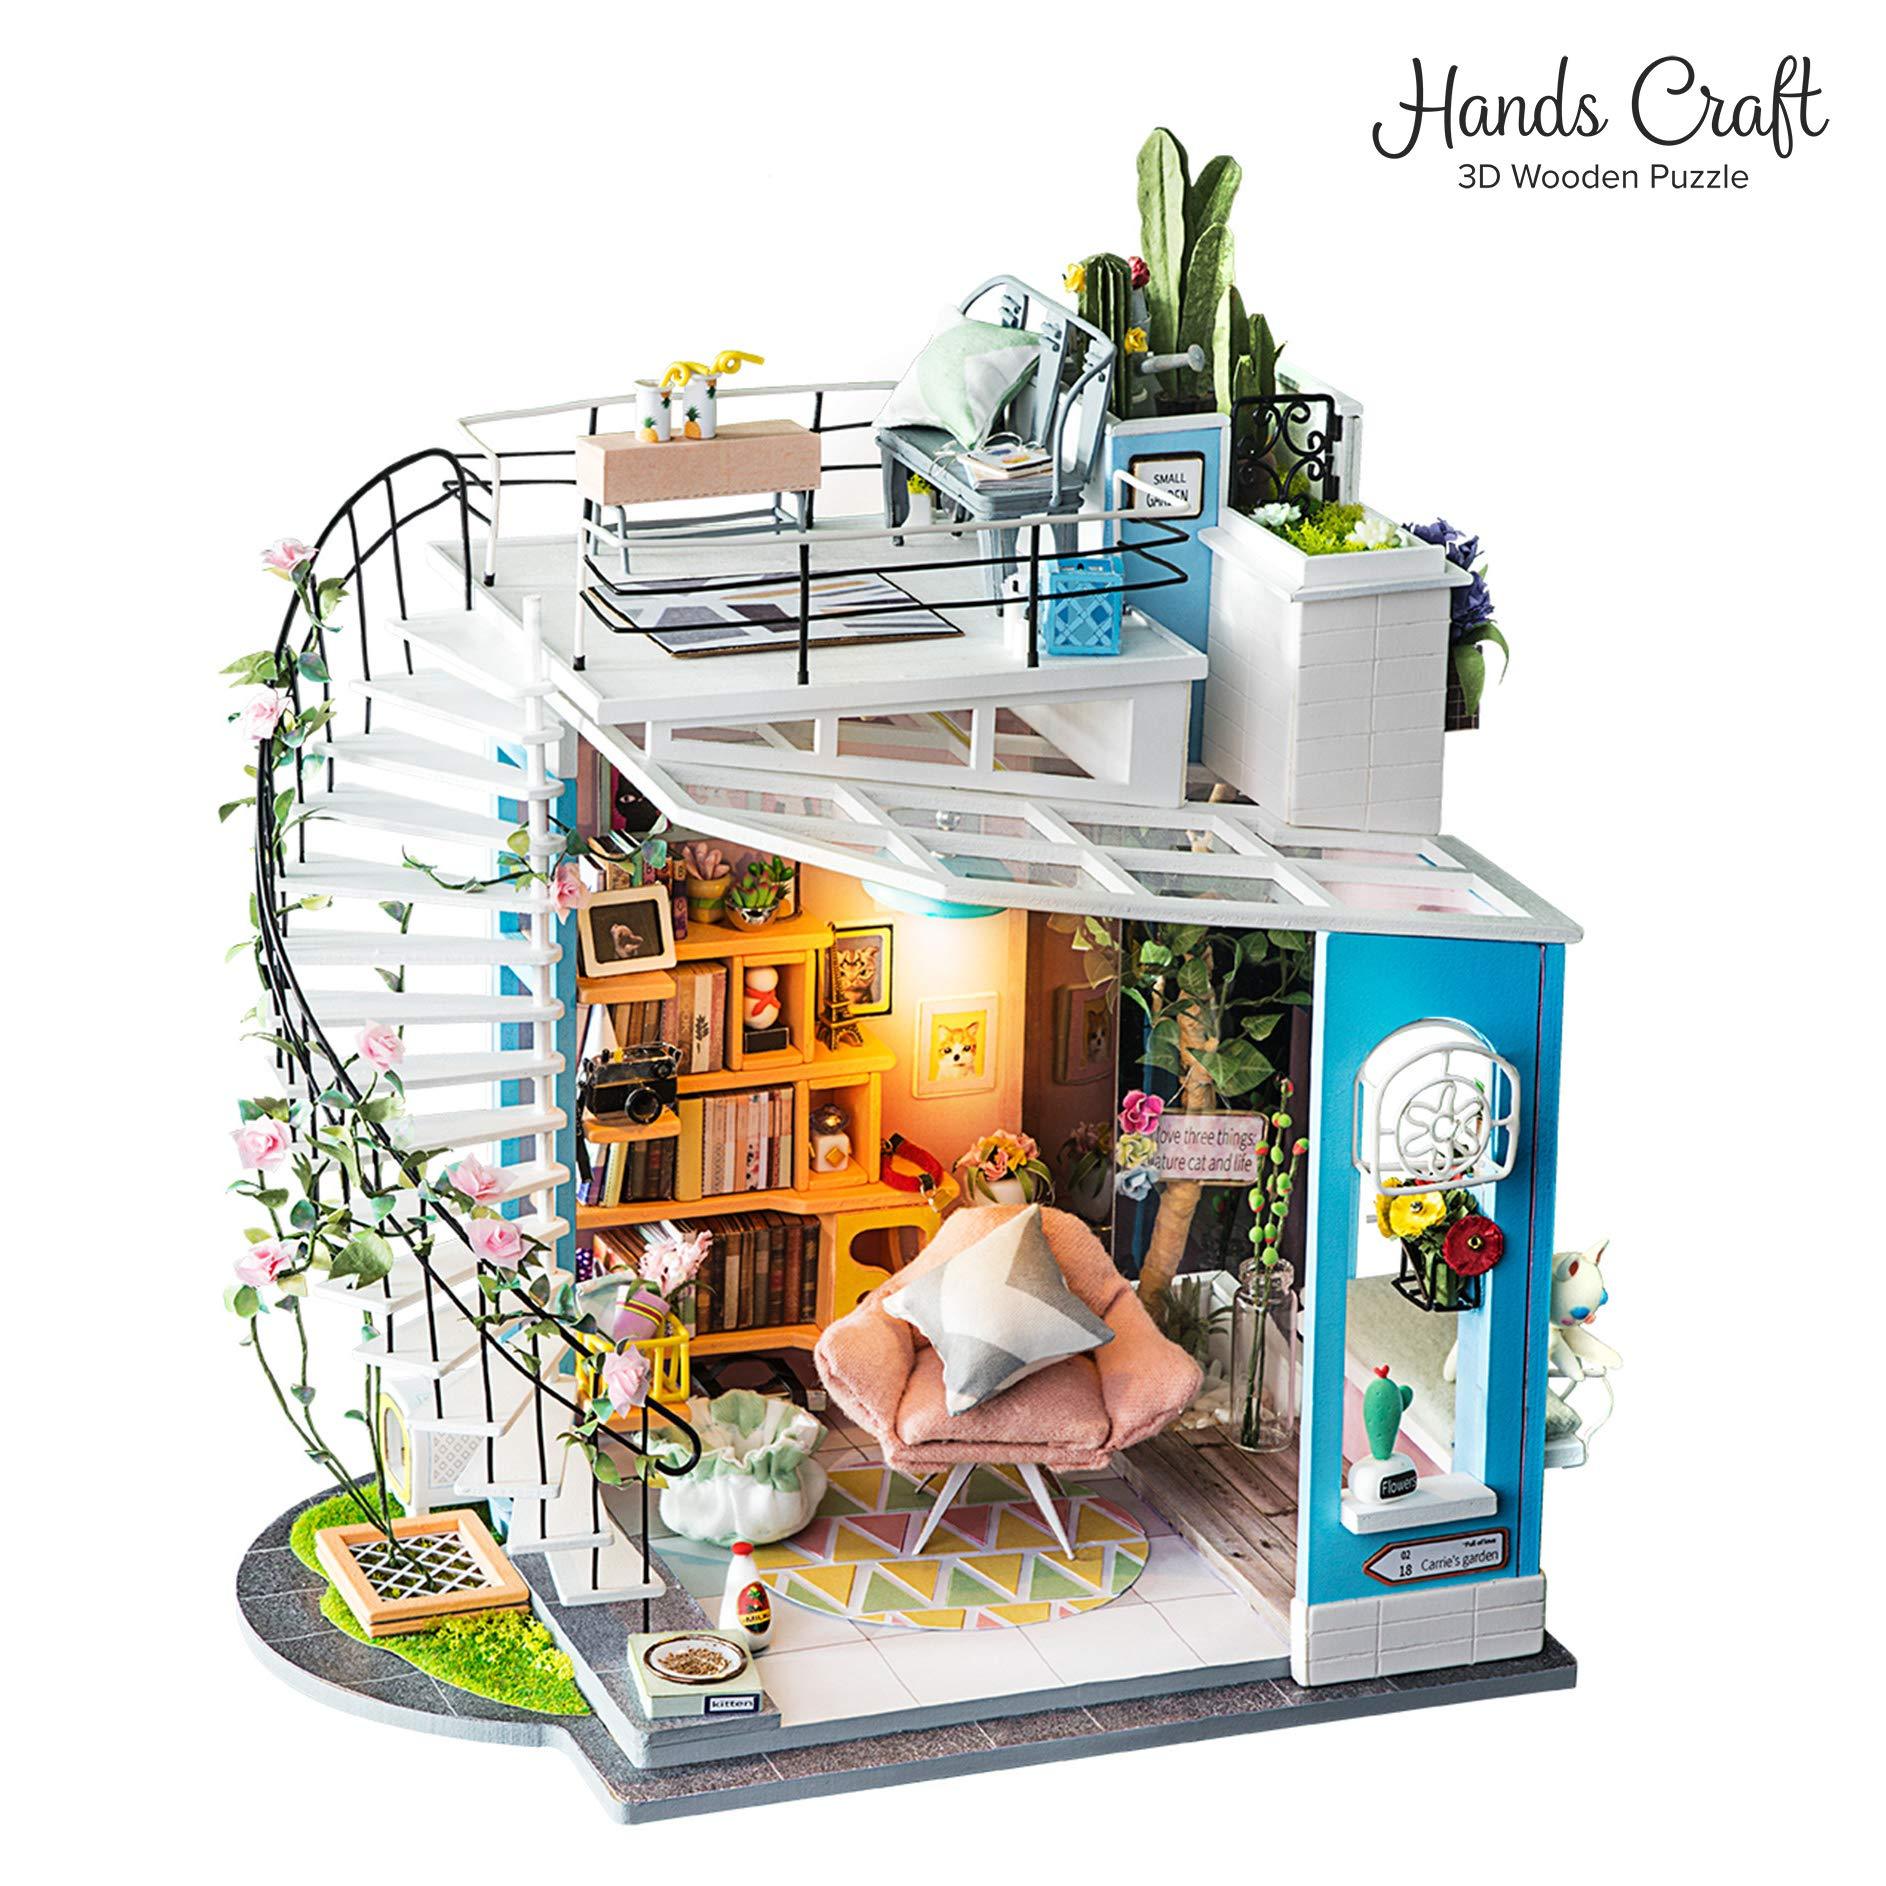 Hands Craft Store: DIY Miniature Dollhouse Kits and 3D Wooden